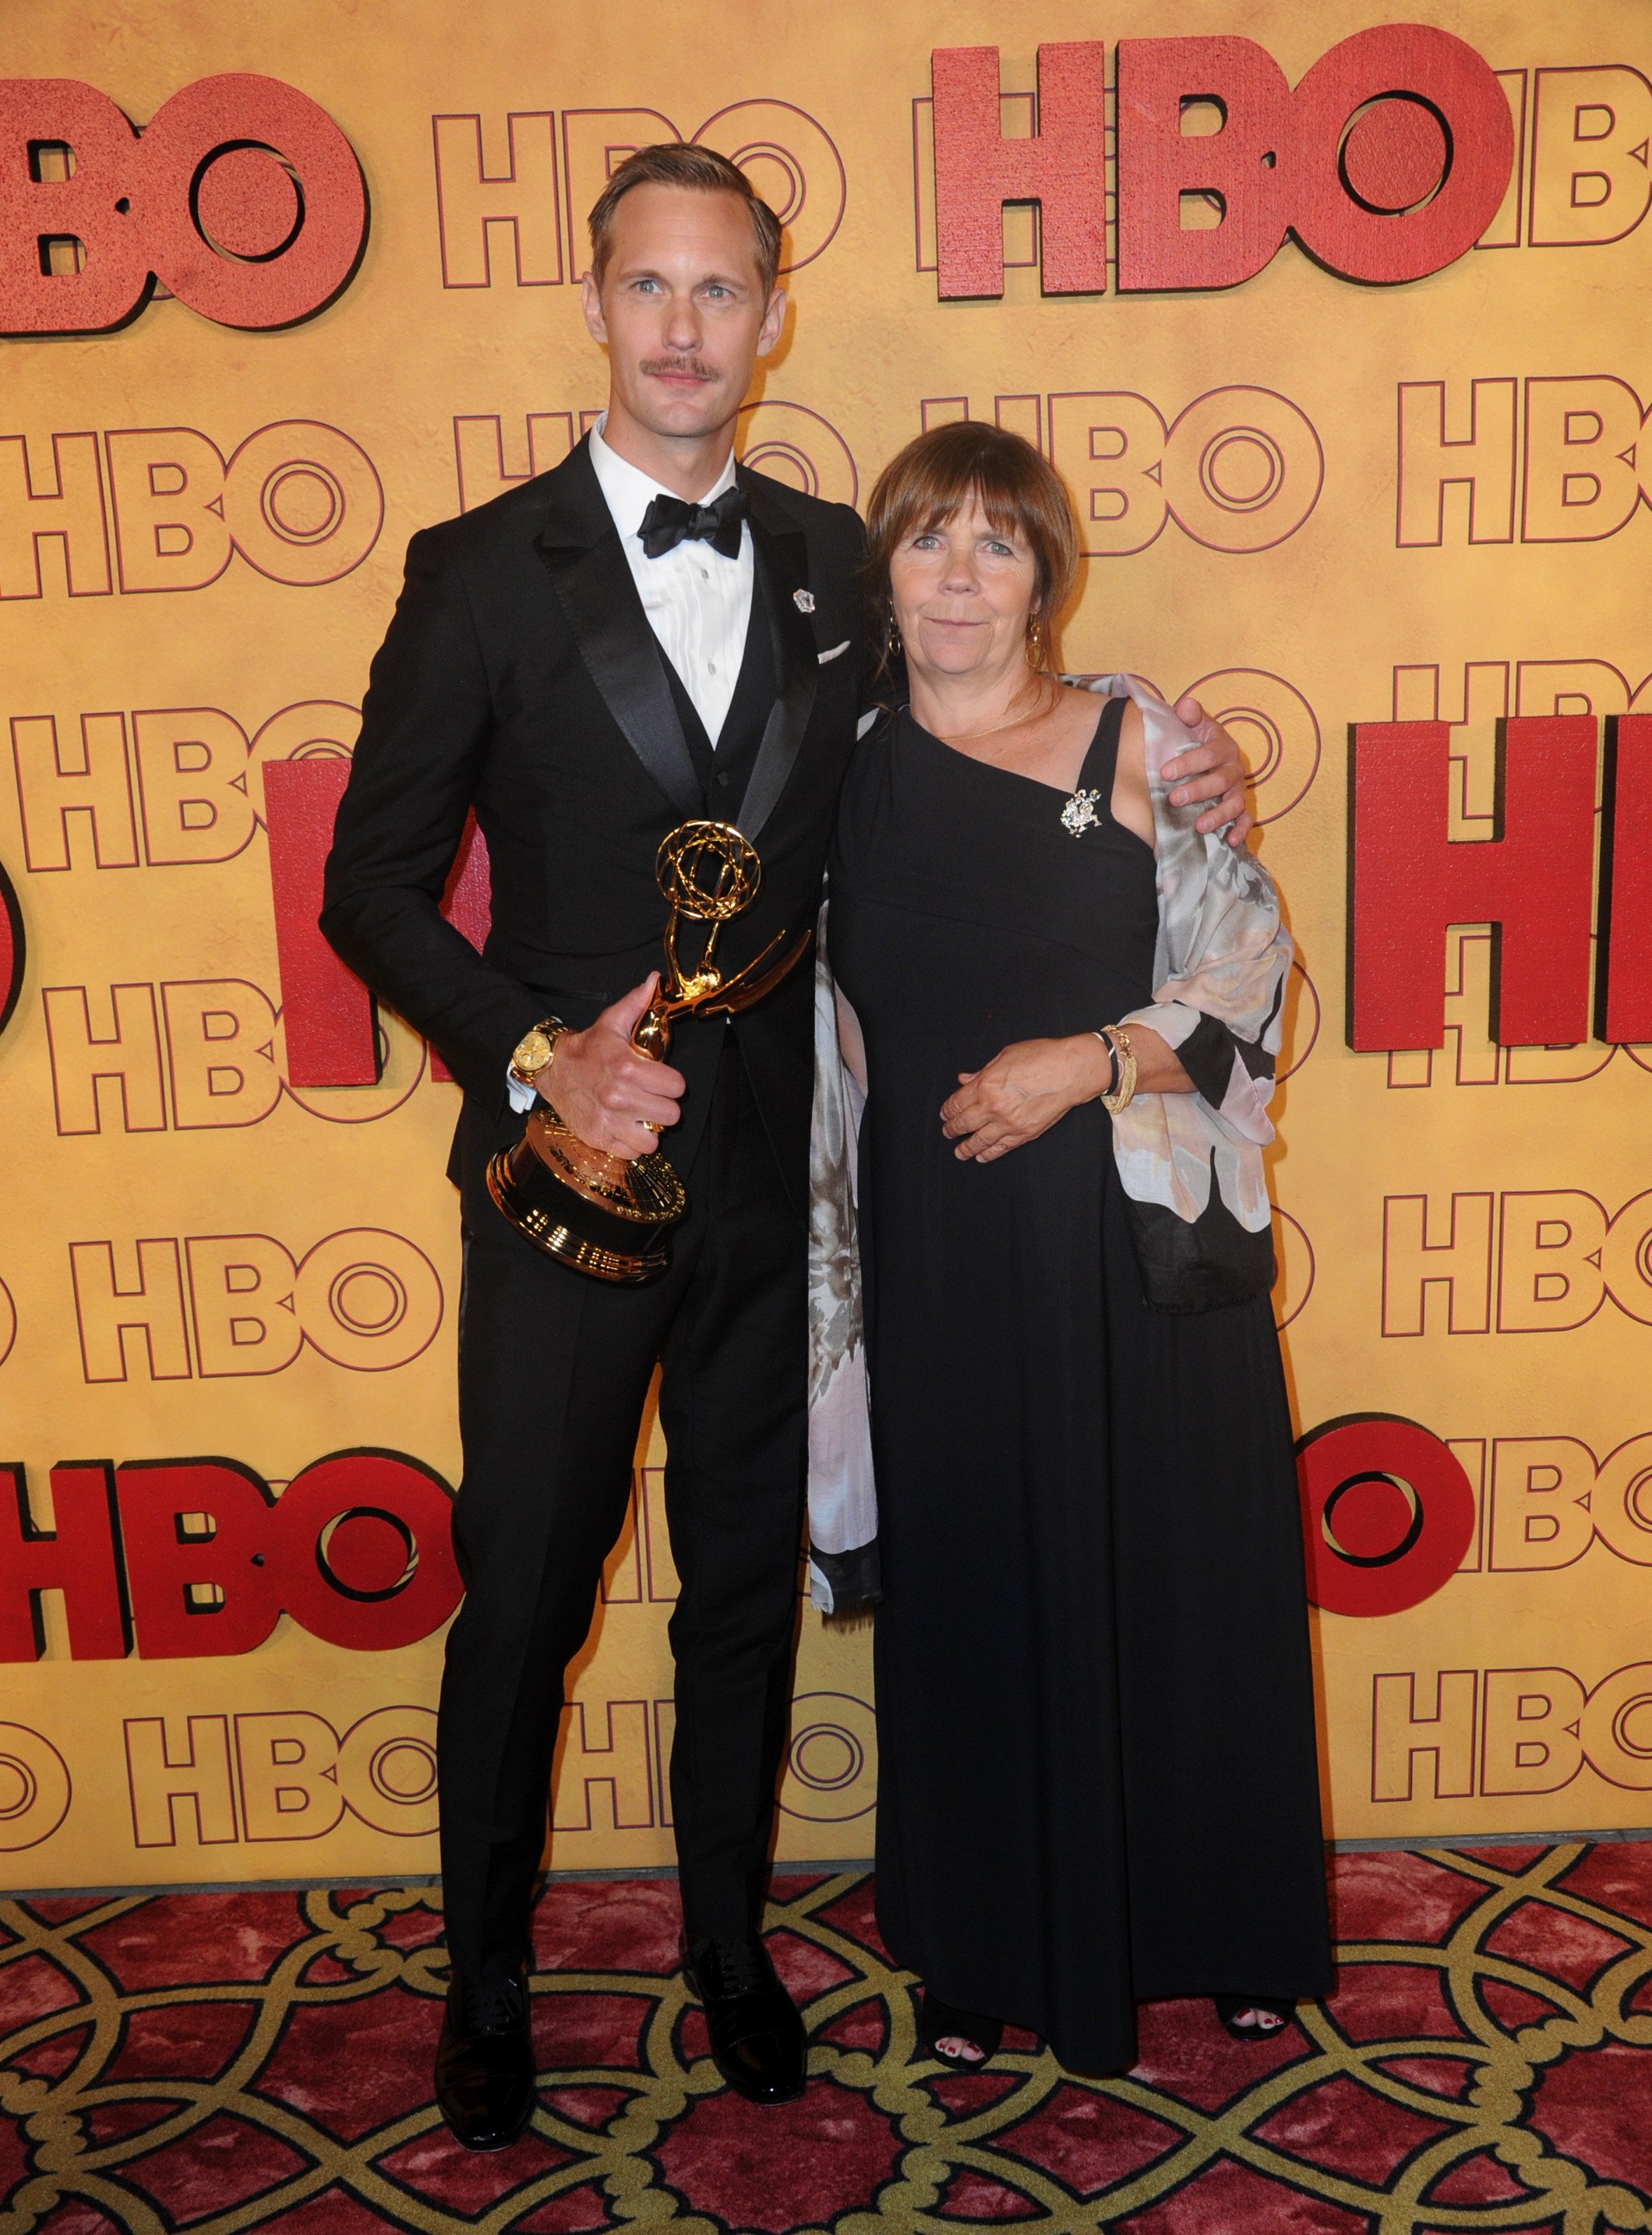  Actor Alexander Skarsgard and his mother arrive for the HBO's Post Emmy Awards Reception held at The Plaza at the Pacific Design Center on September 17, 2017 in Los Angeles, California. | Source: Getty Images